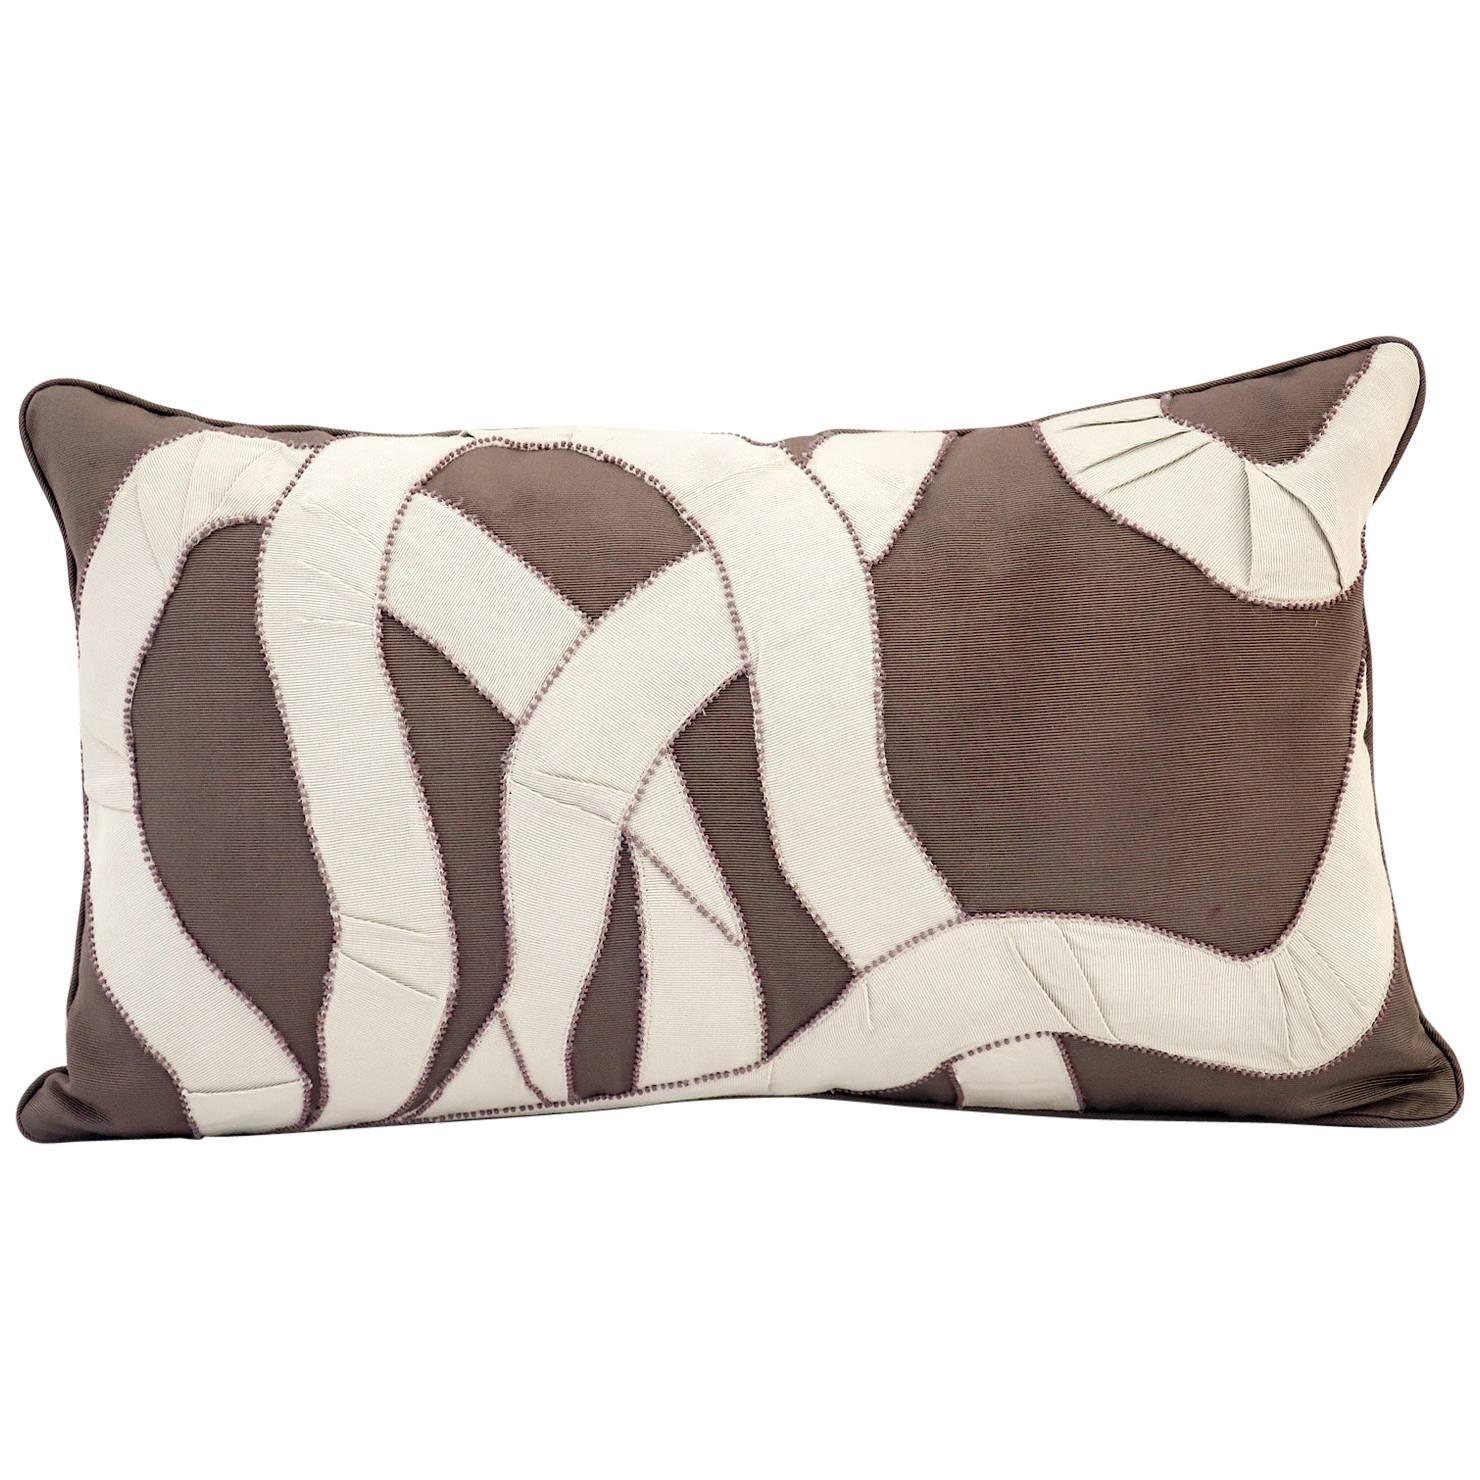 Handcrafted Pillow Hand Appliqué Faux Ribbon Design with Beading in Matt Beads For Sale